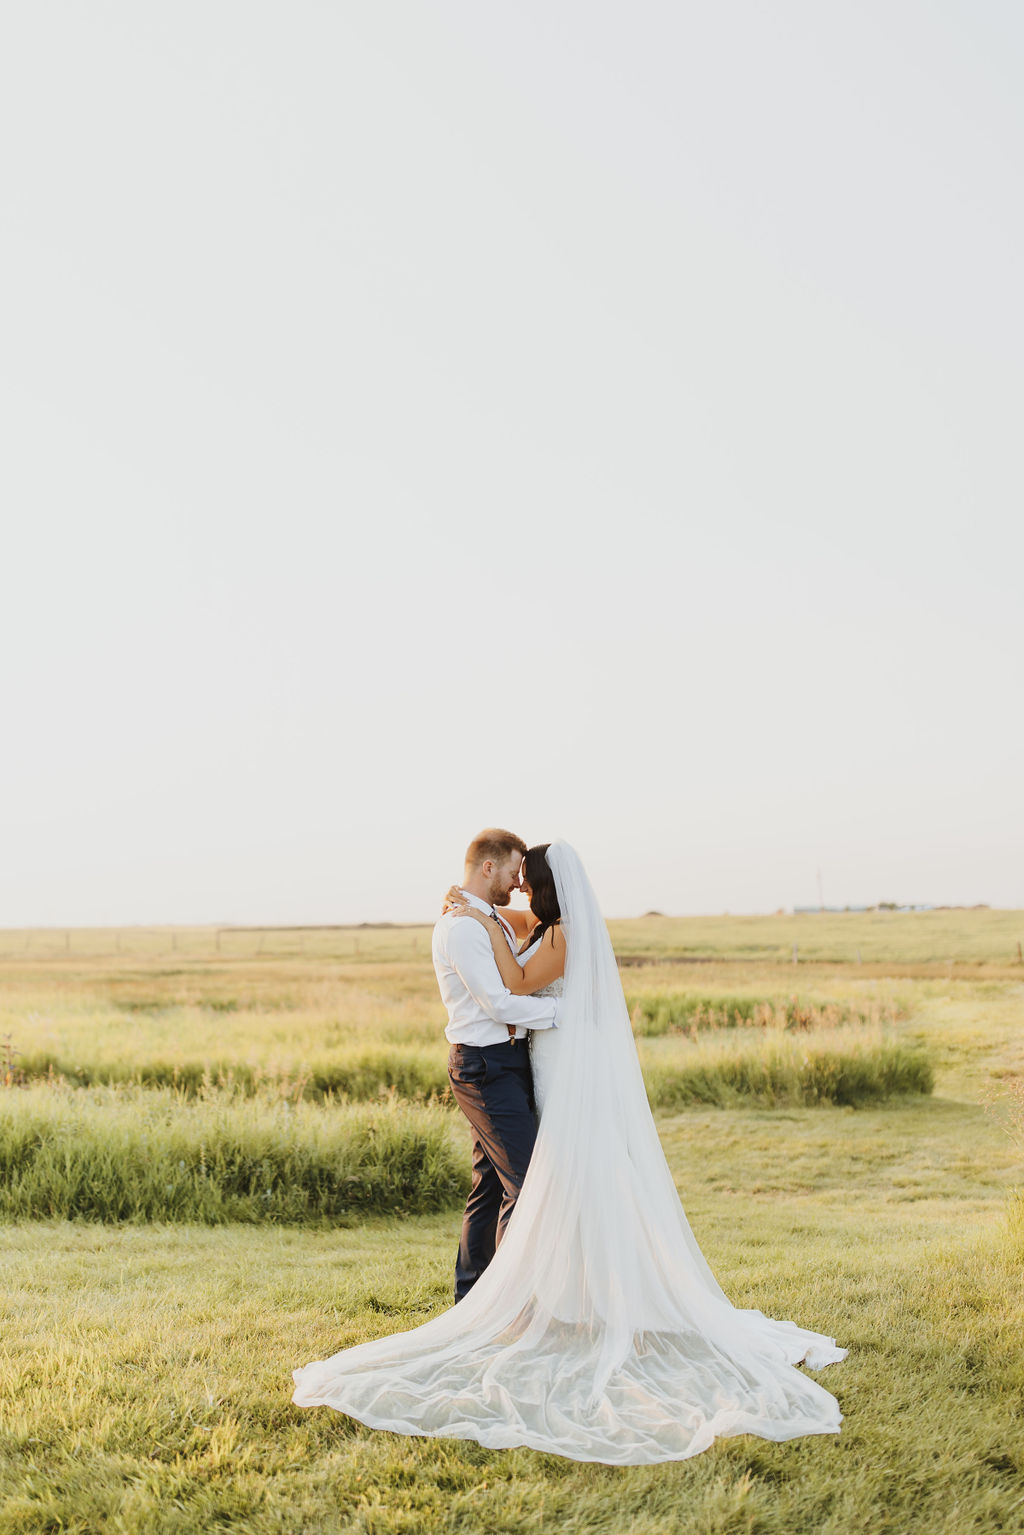 A bride and groom embrace in a grassy field.